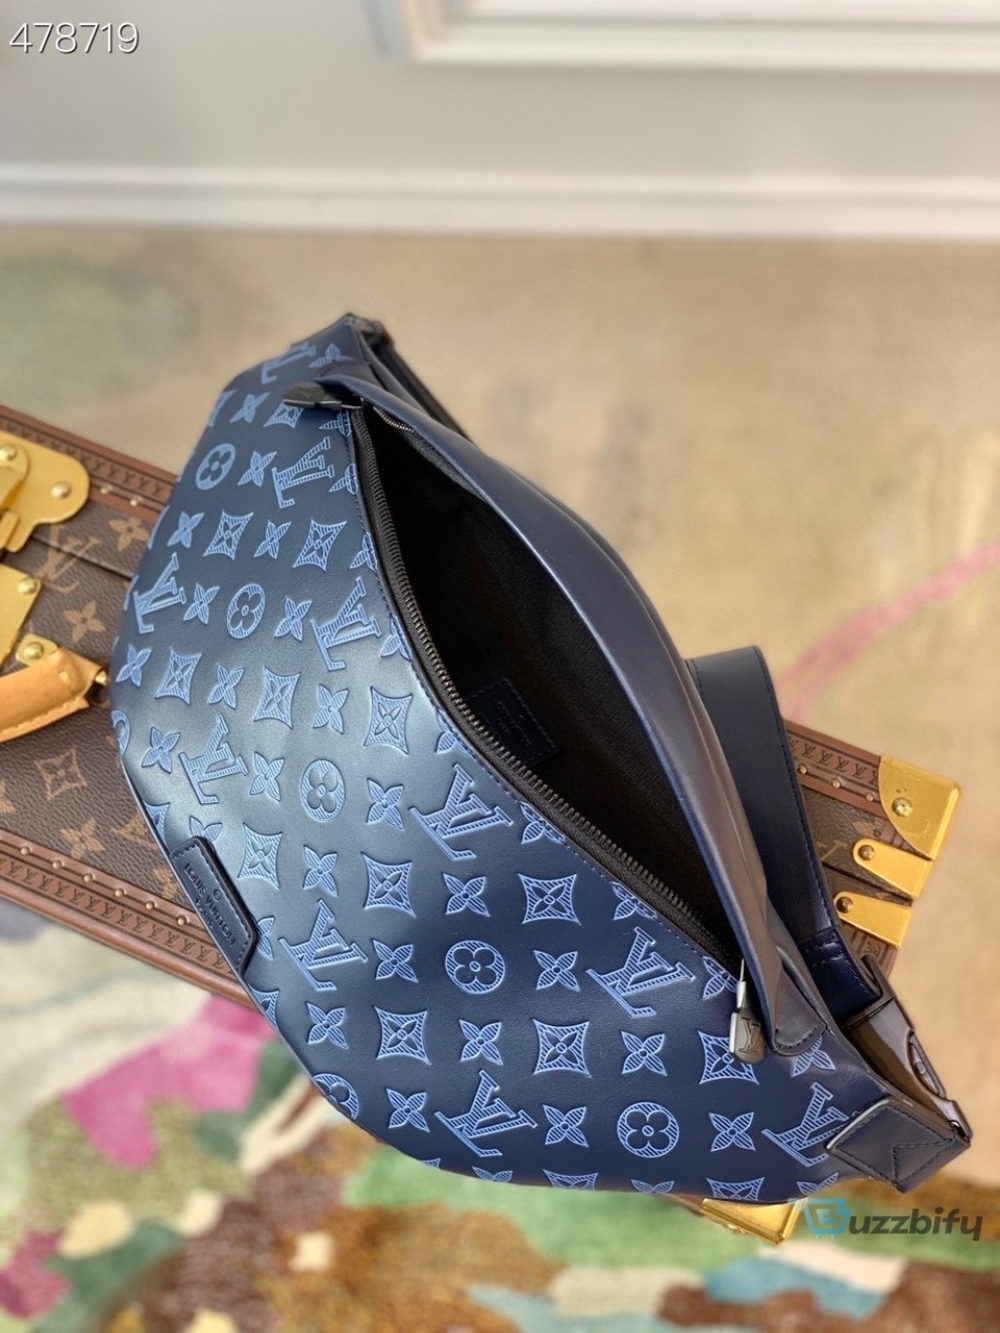 louis vuitton discovery bumbag pm monogram shadow navy blue for men mens belt bags 173in44cm lv m45729 2799 buzzbify 1 26